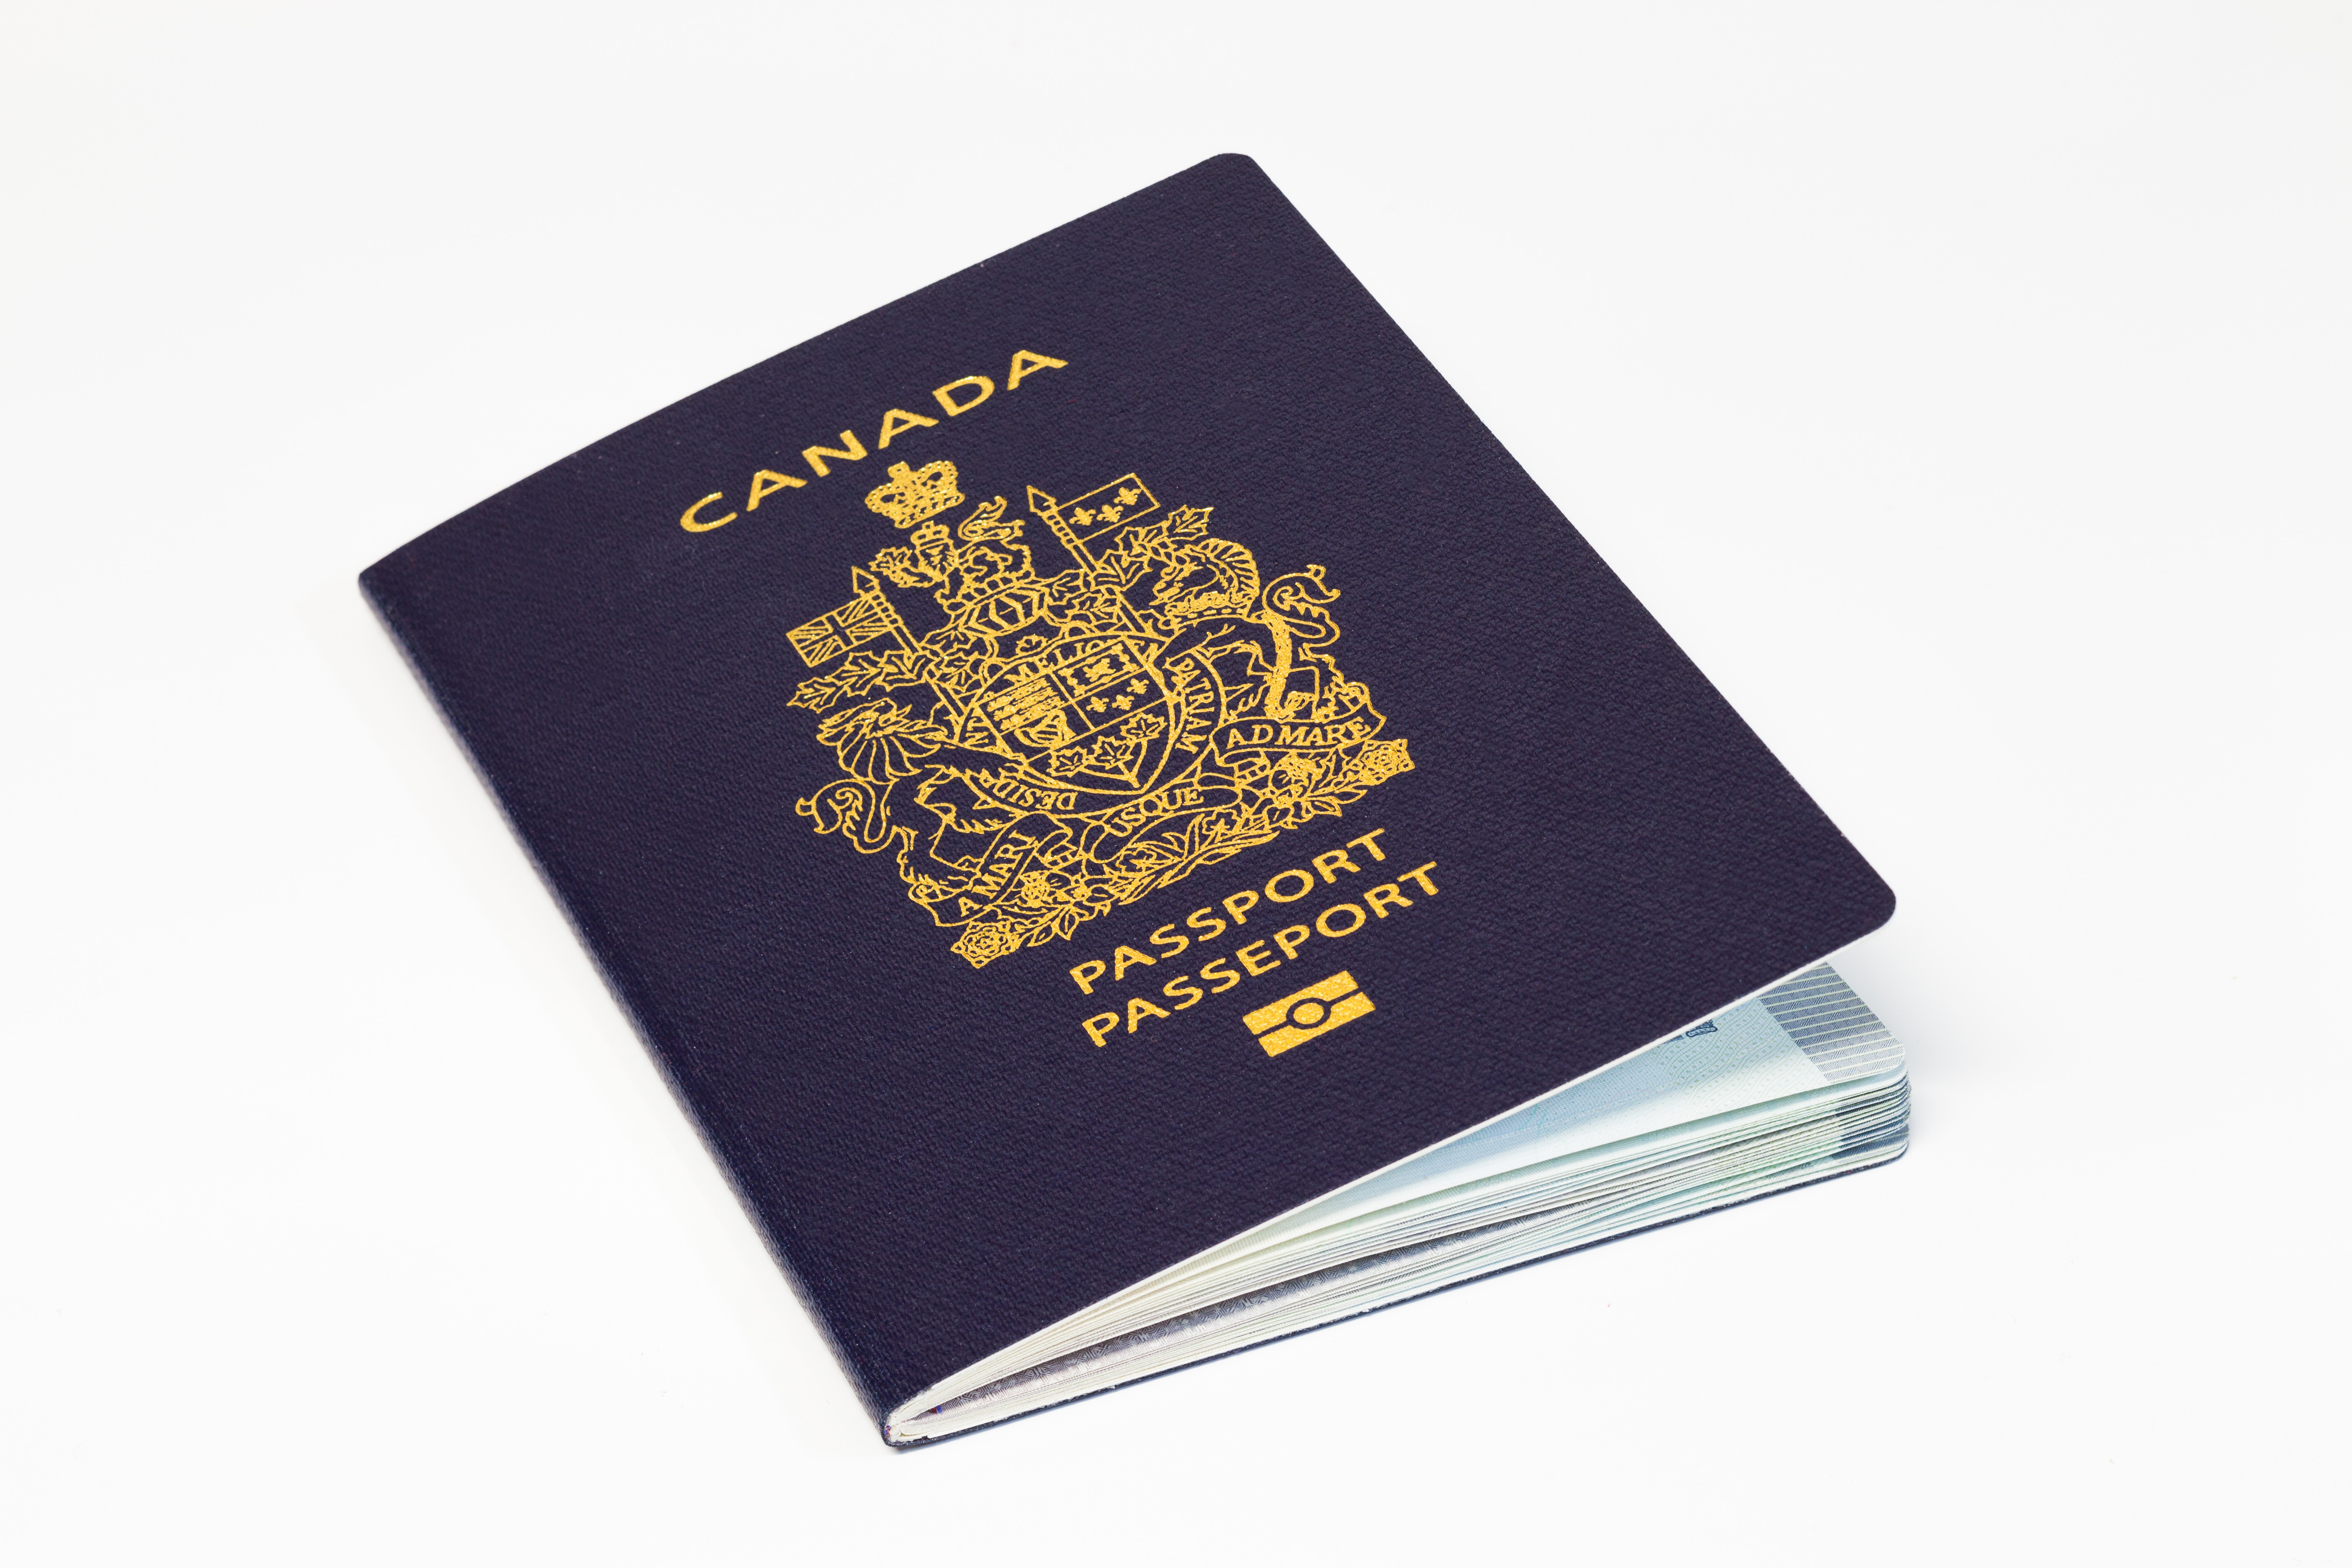 Canadian passport, which can be obtained by Russians, Ukrainians and Belarusians